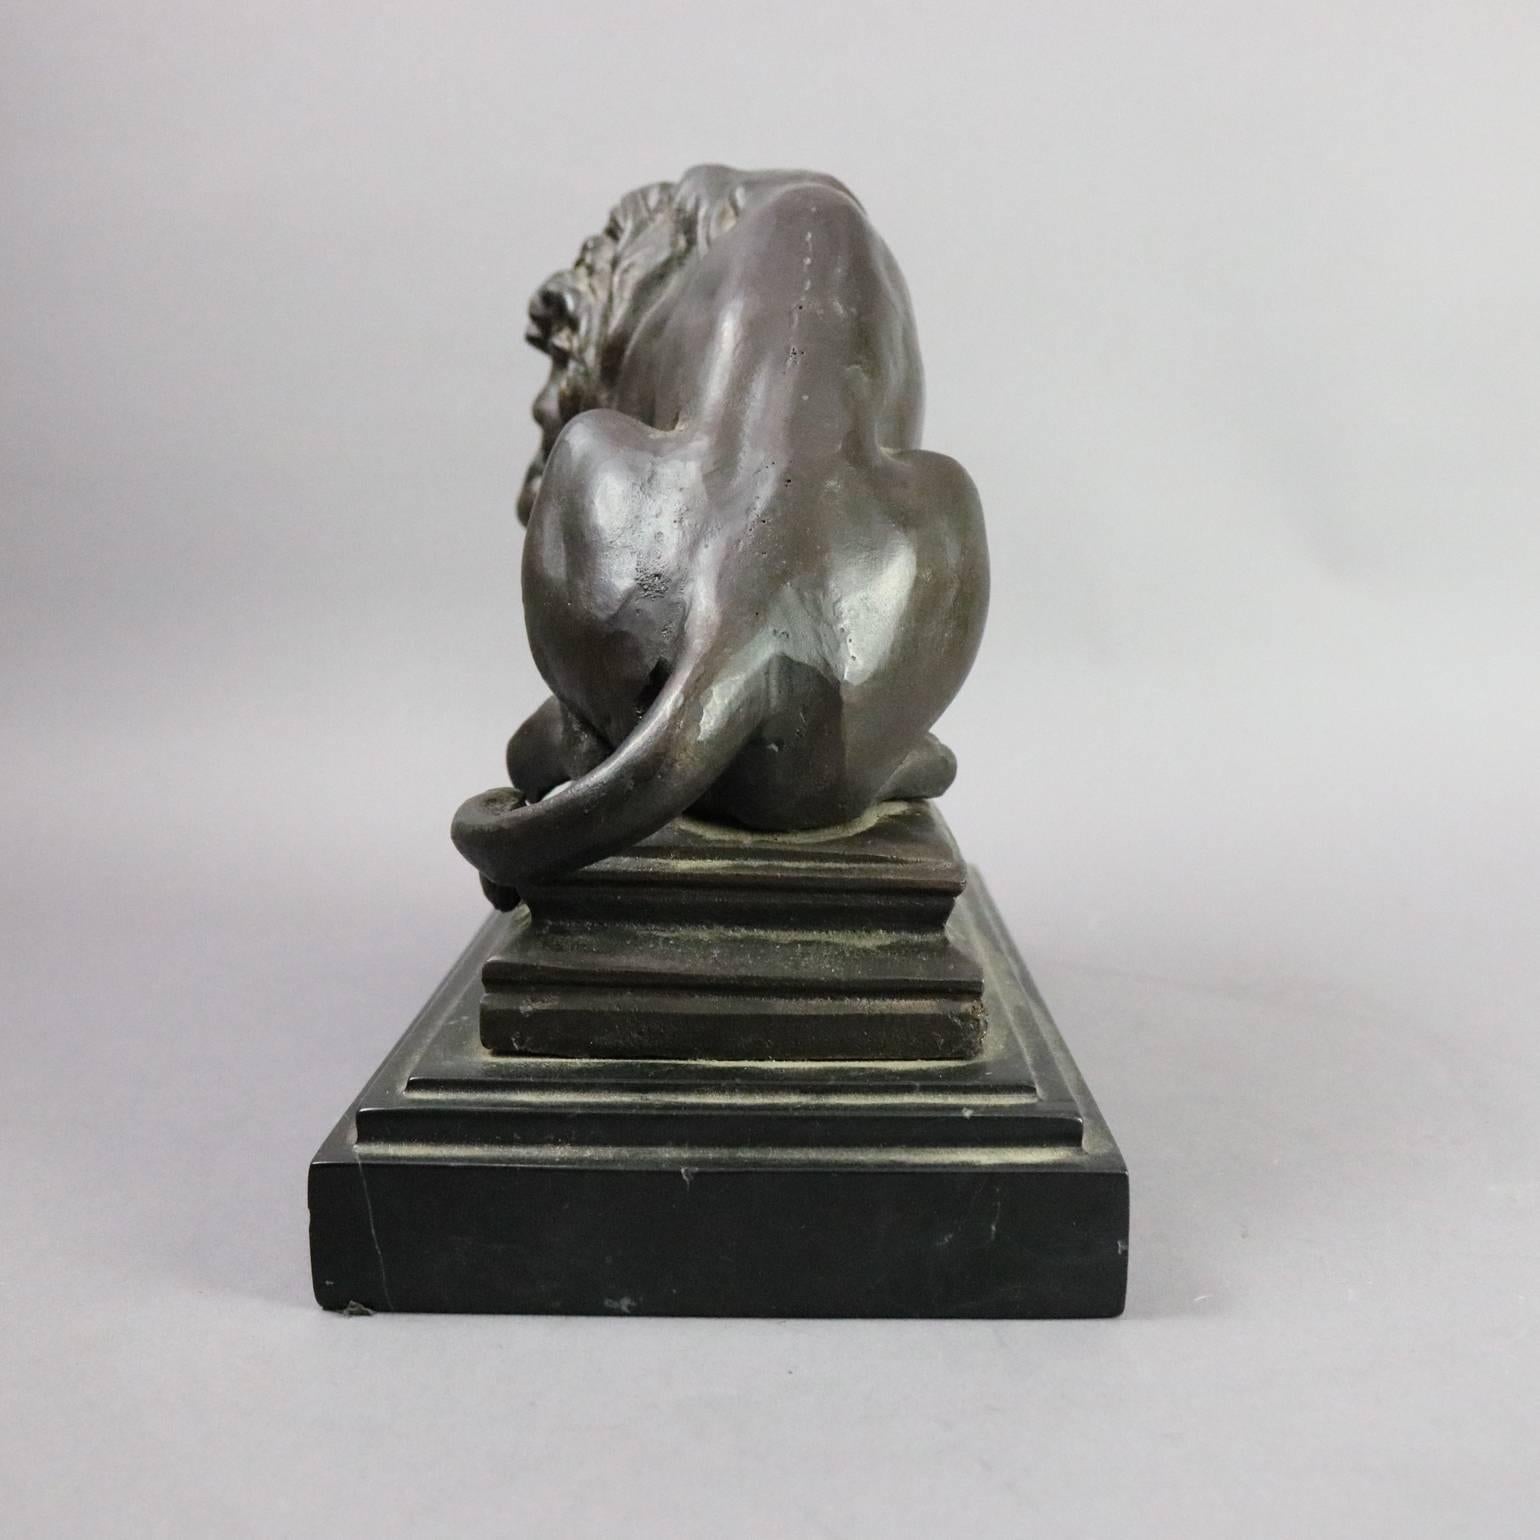 Antique Barye school figural bronze sculpture on marble stepped base depicts hunt scene with lion over his kill (boar), circa 1910

Measures: 10" H x 12" W x 6" D.